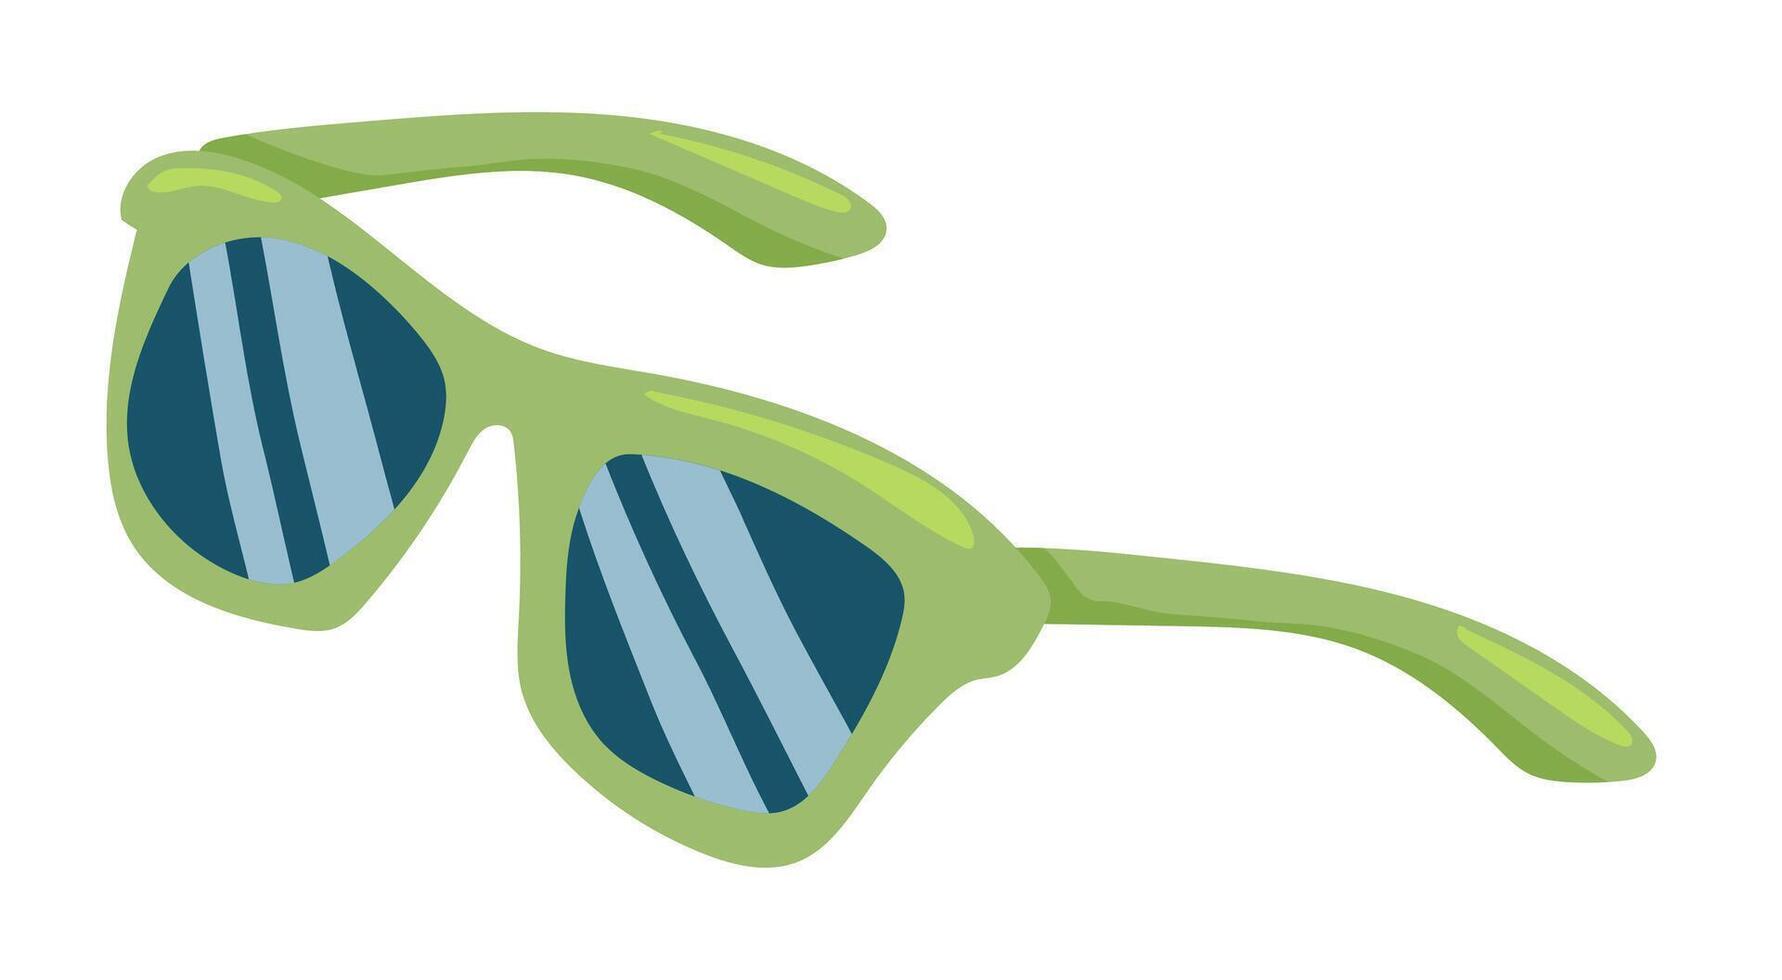 Sunglasses in flat design. Eyeglass with green plastic frame and shadow lens. illustration isolated. vector